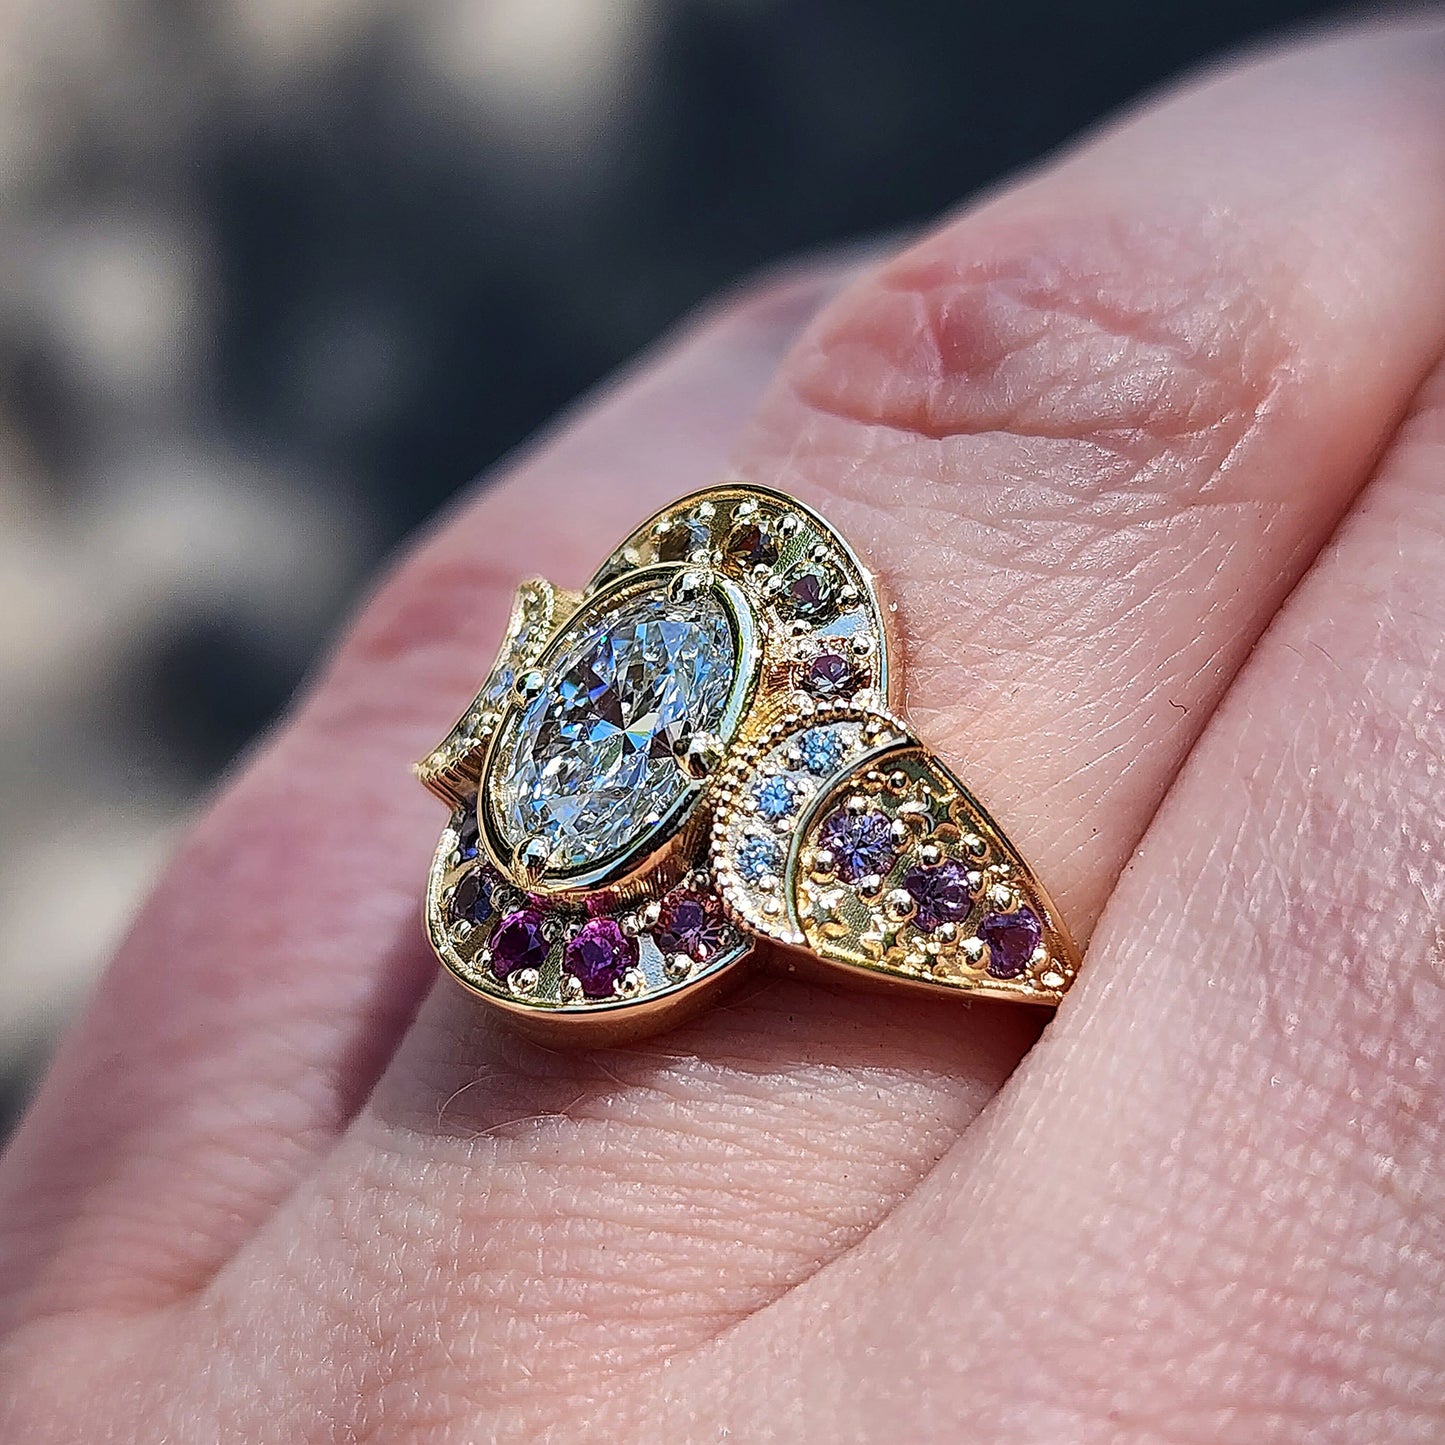 Spectrum Moon Ring with Lab Diamond Oval Natural Rainbow Sapphire Halo and Gold Stardust - Modern Bohemian Eclectic Celestial Engagemet Ring - Pick your Lab Diamond or Moissanite Center Stone